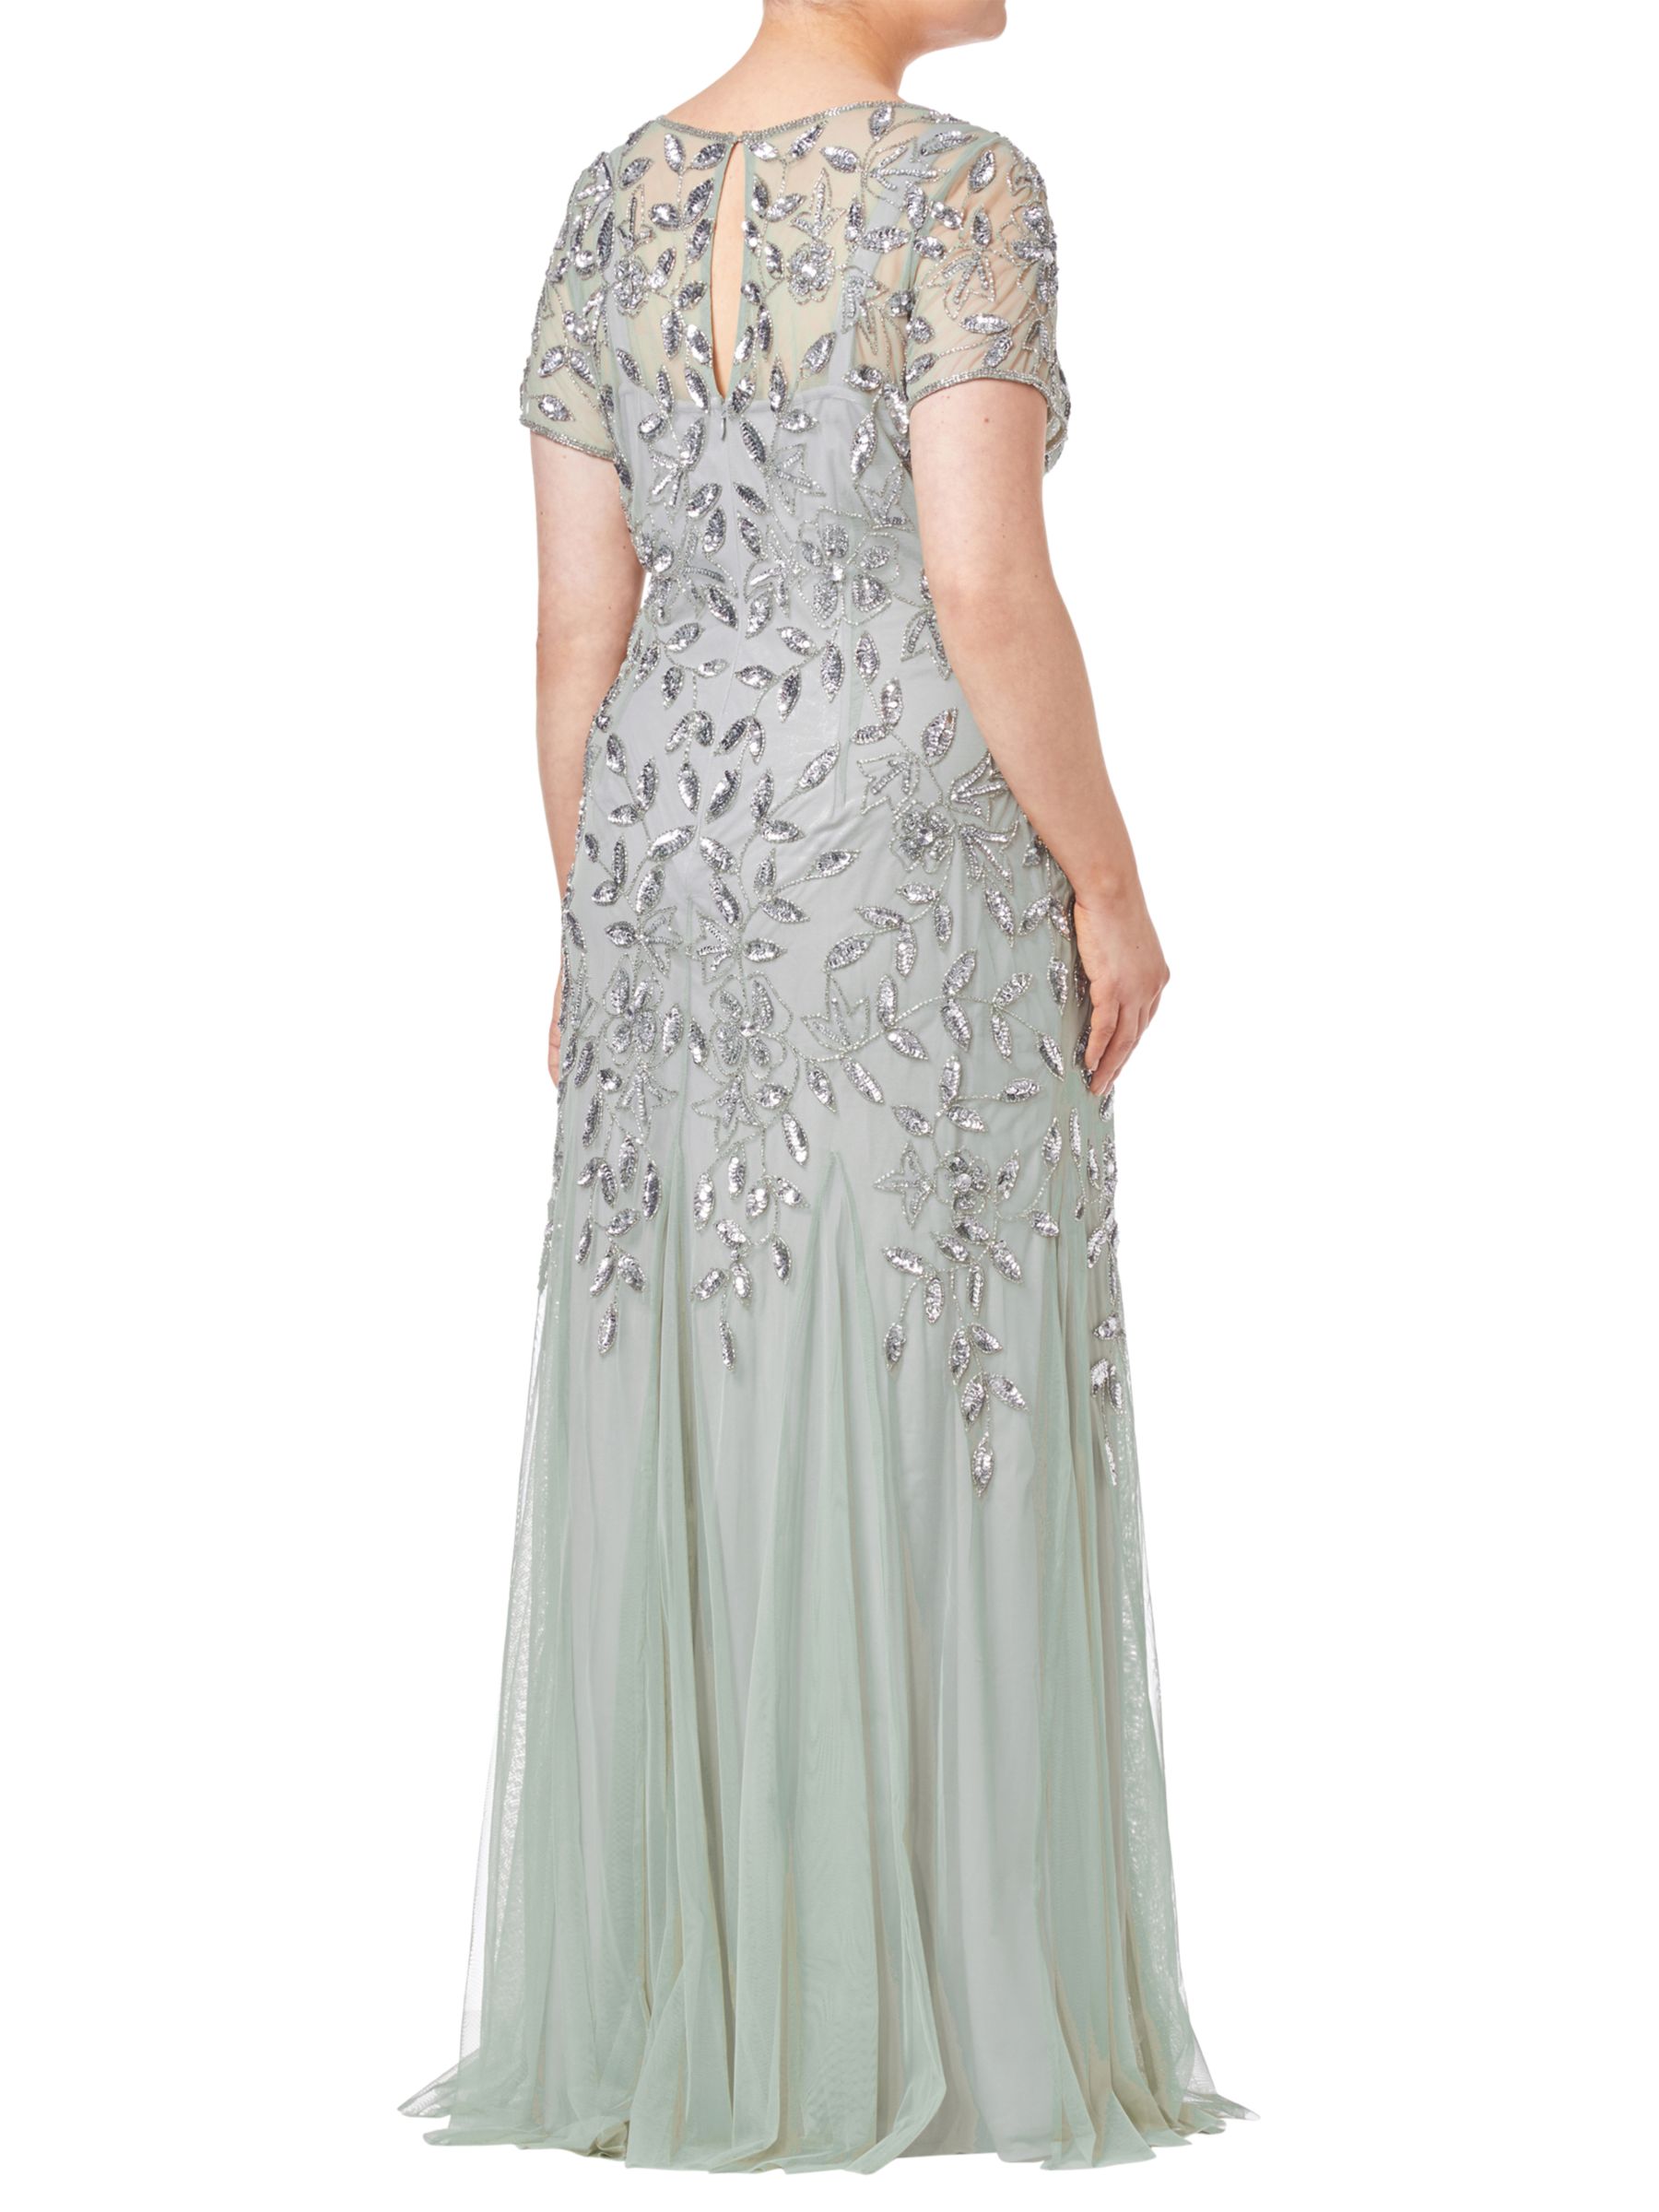 Adrianna Papell Floral Beaded Godet Dress, Mint at John Lewis & Partners